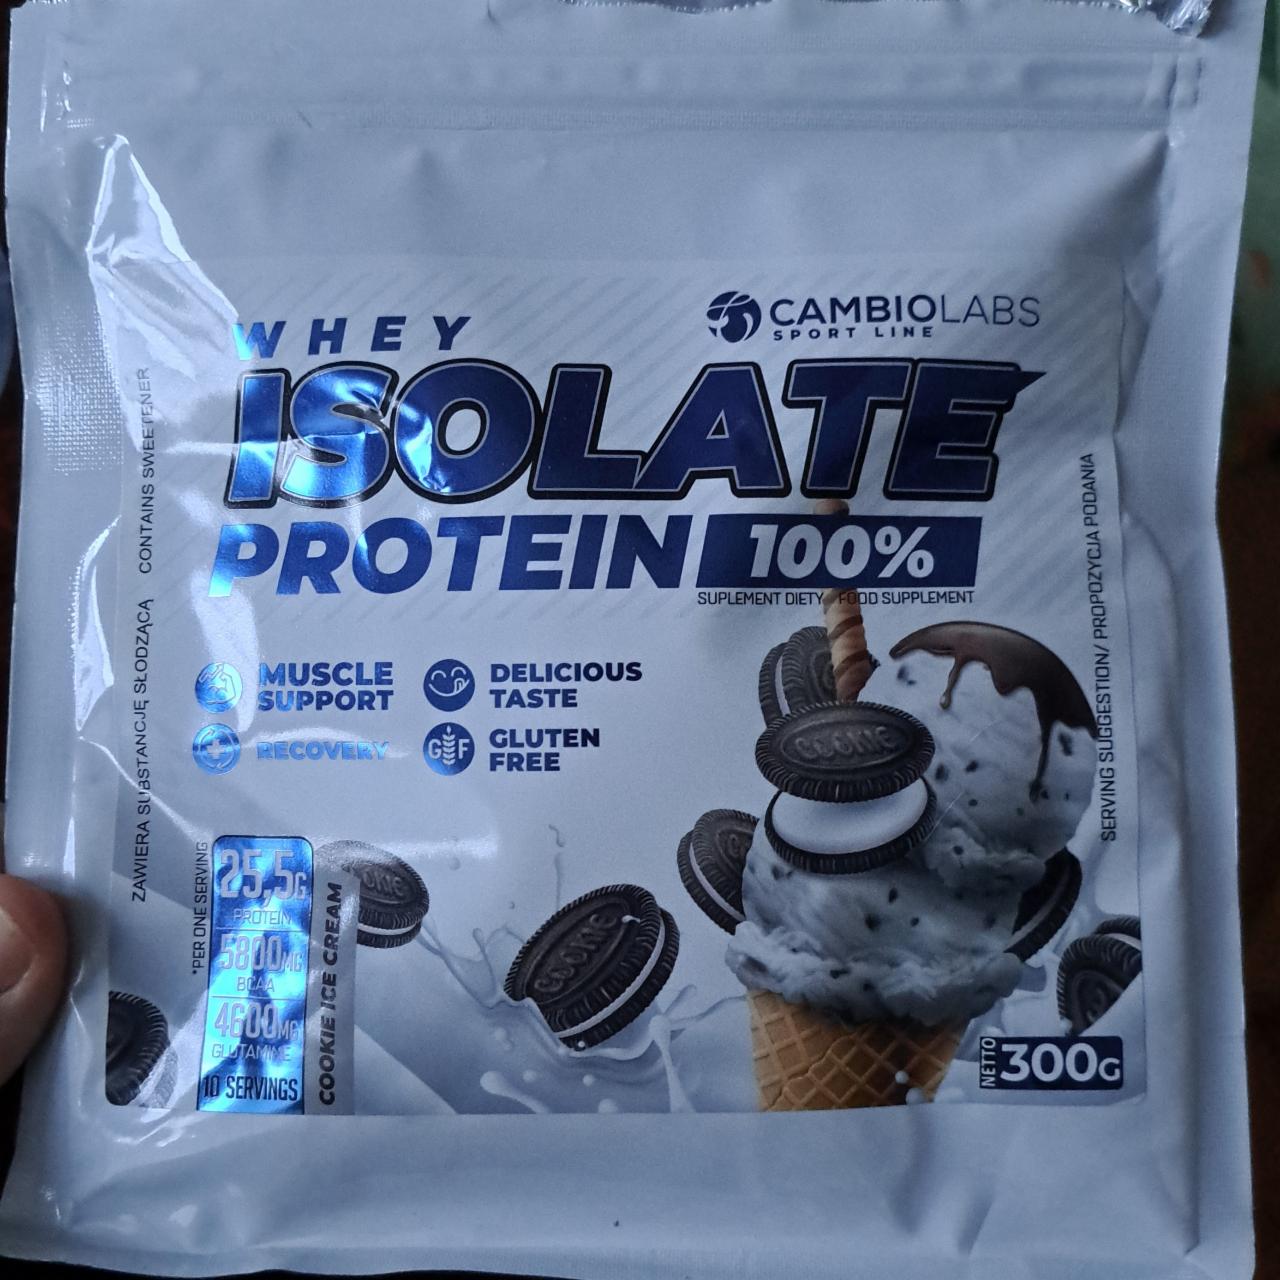 Fotografie - Whey Isolate Protein 100% Cookie Ice Cream CambioLabs